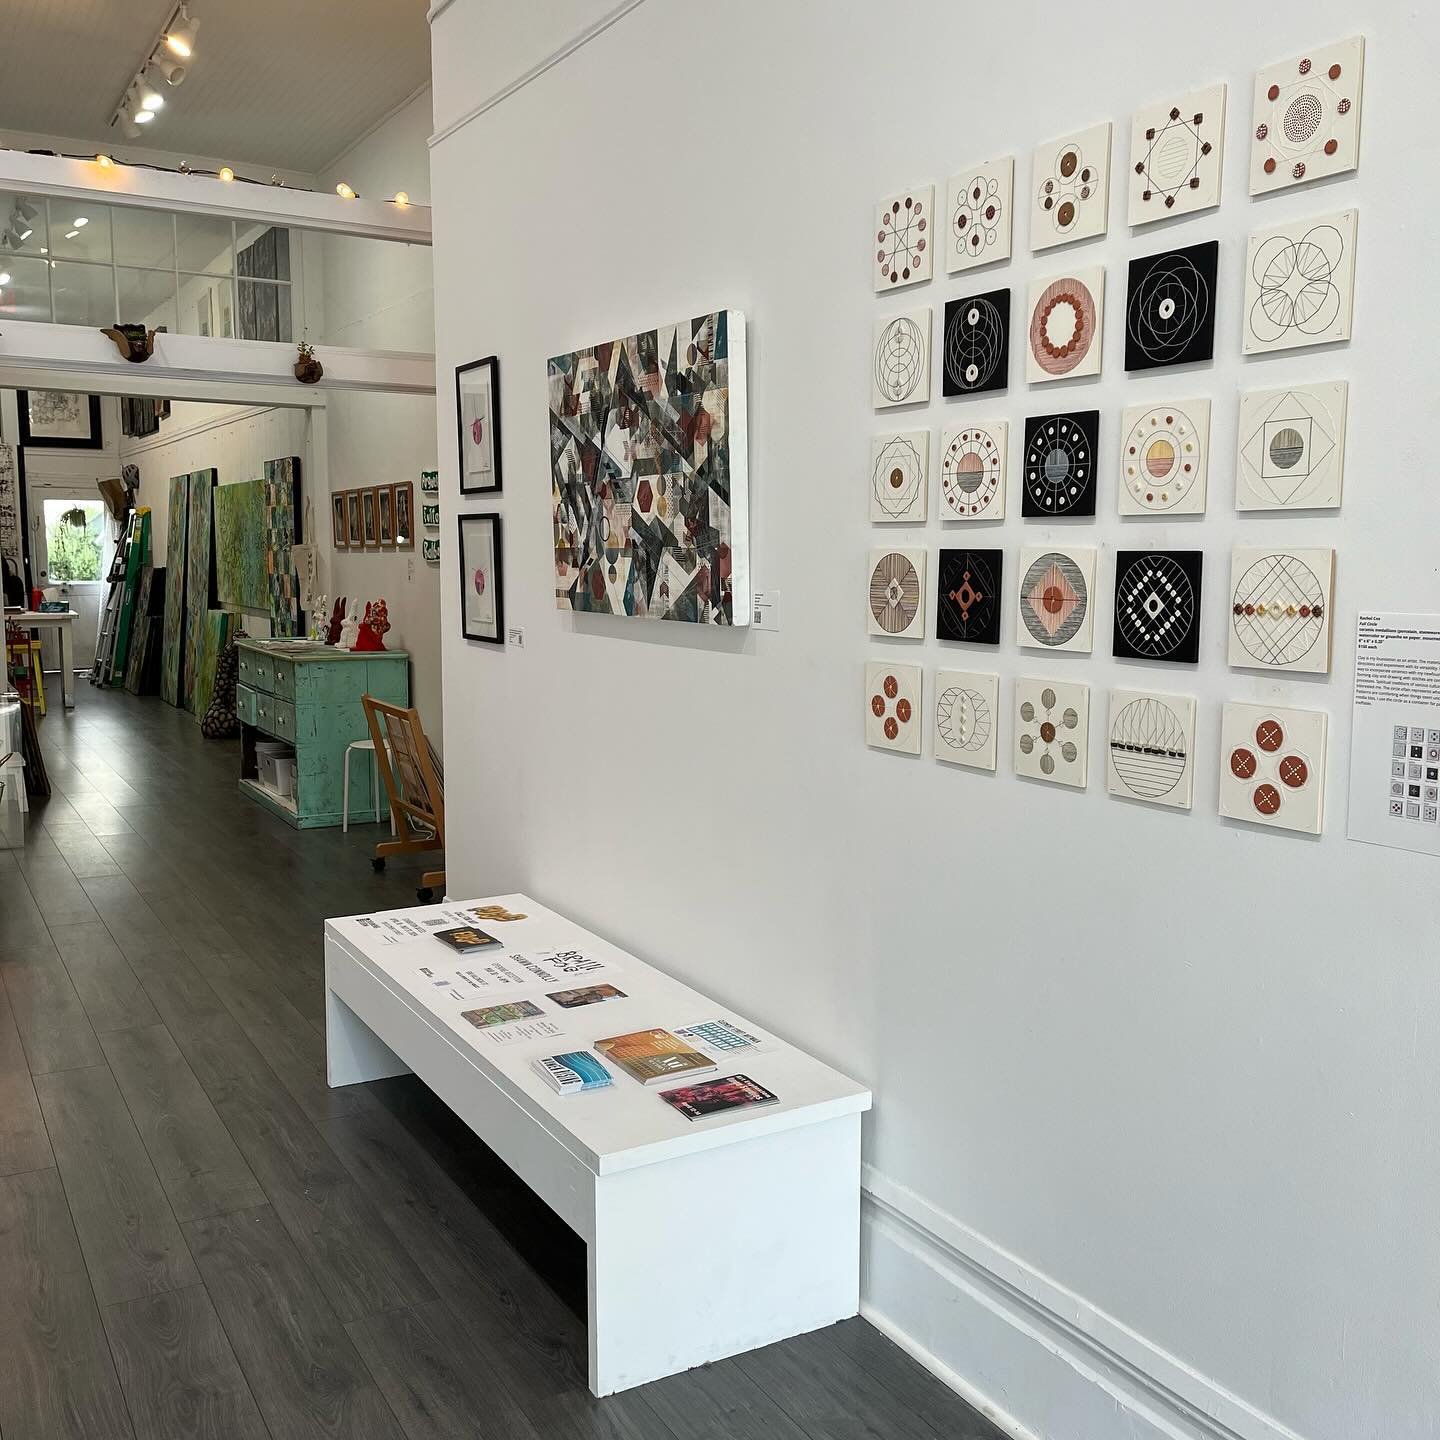 My &ldquo;Full Circle&rdquo; tiles are on view now in the Selections show at The Drawing Room @drawingroomsf. Take a stroll down Clement and check out the nicely-curated group show in this sweet little gallery through May 12. Thanks so much to Ren&ea